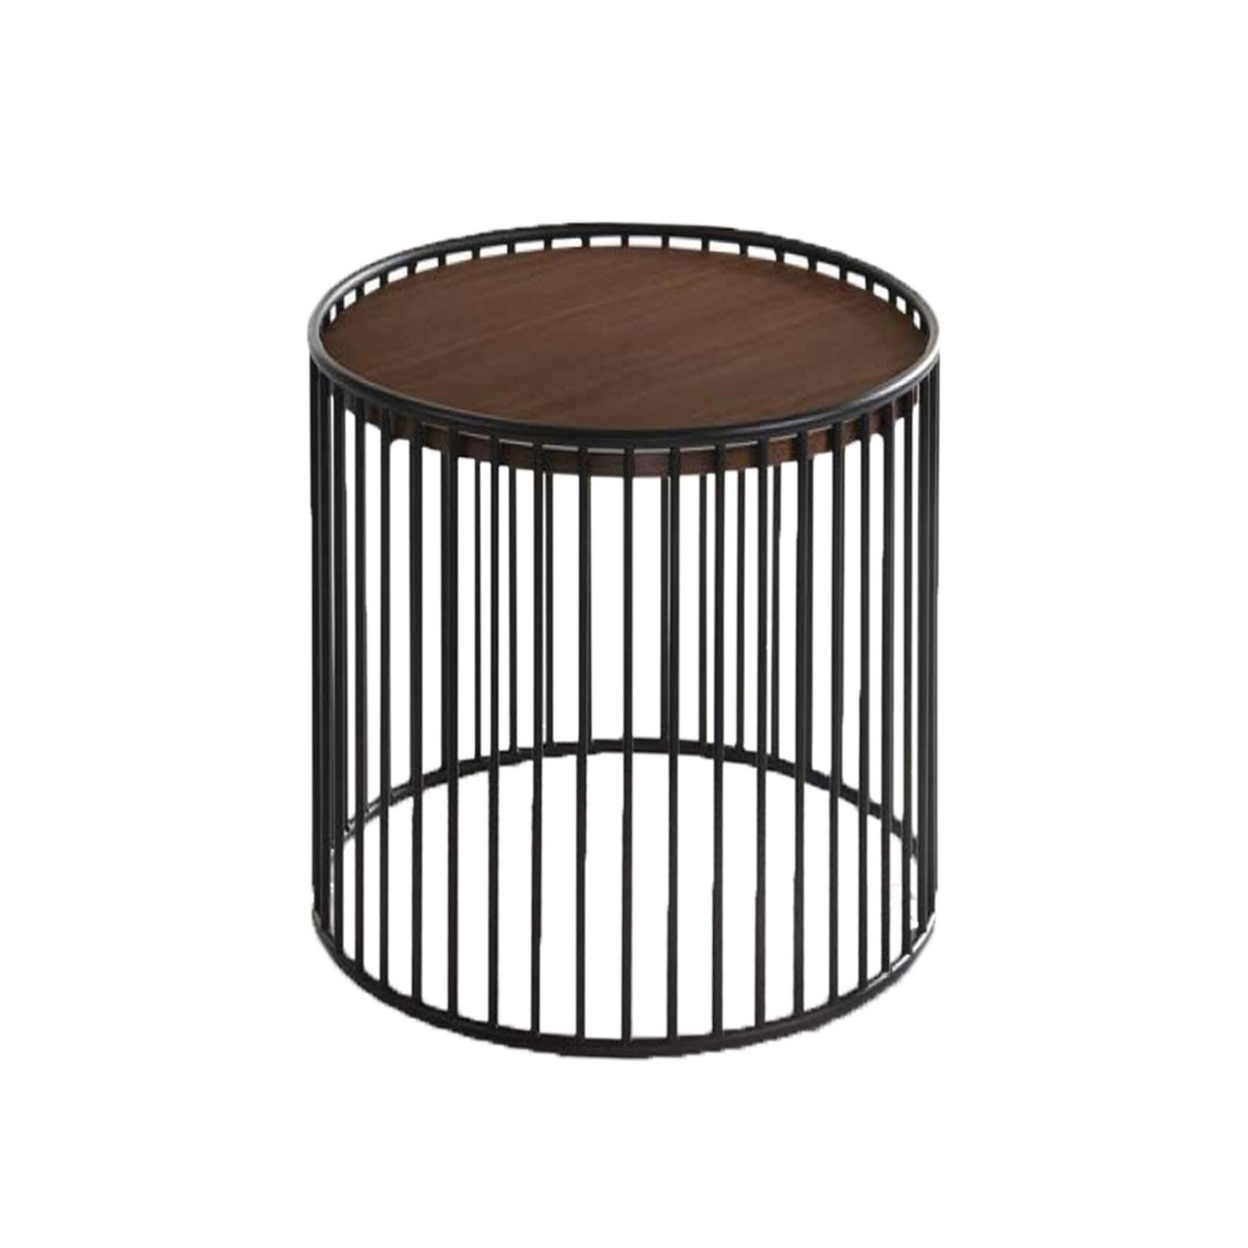 Circular Cage Shaped Metal Frame End Table With Wood Top, Brown And Black- Saltoro Sherpi